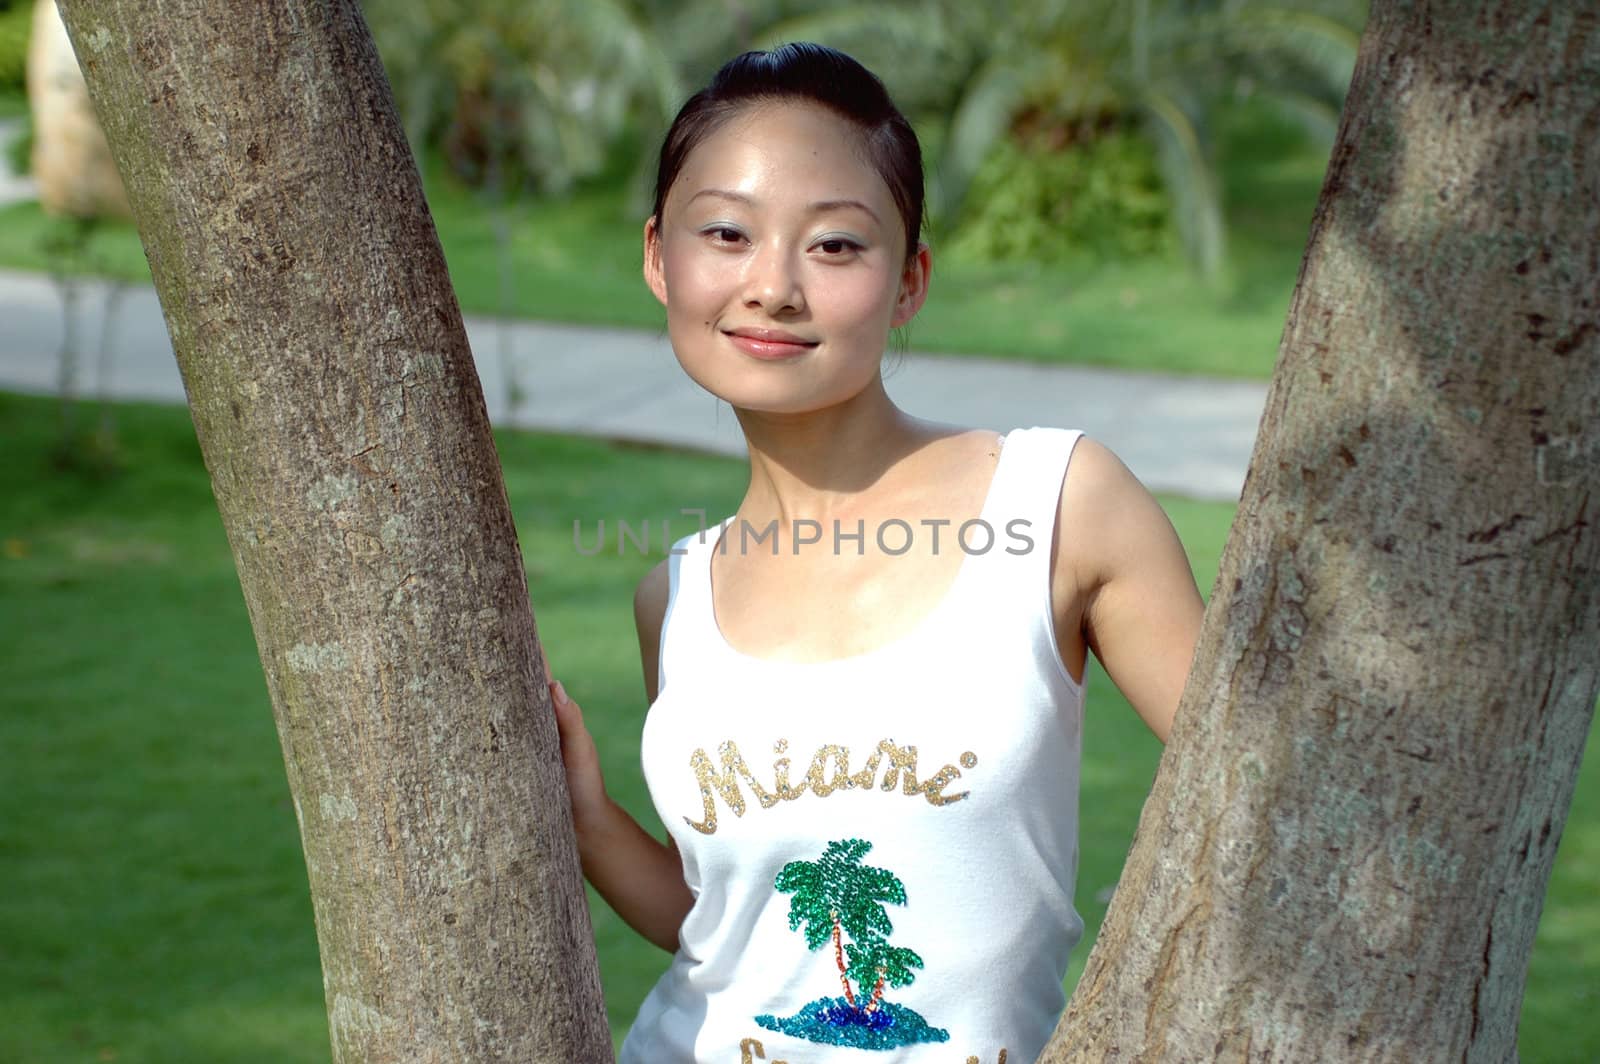 Chinese girl in park standing between two branches, smiling.